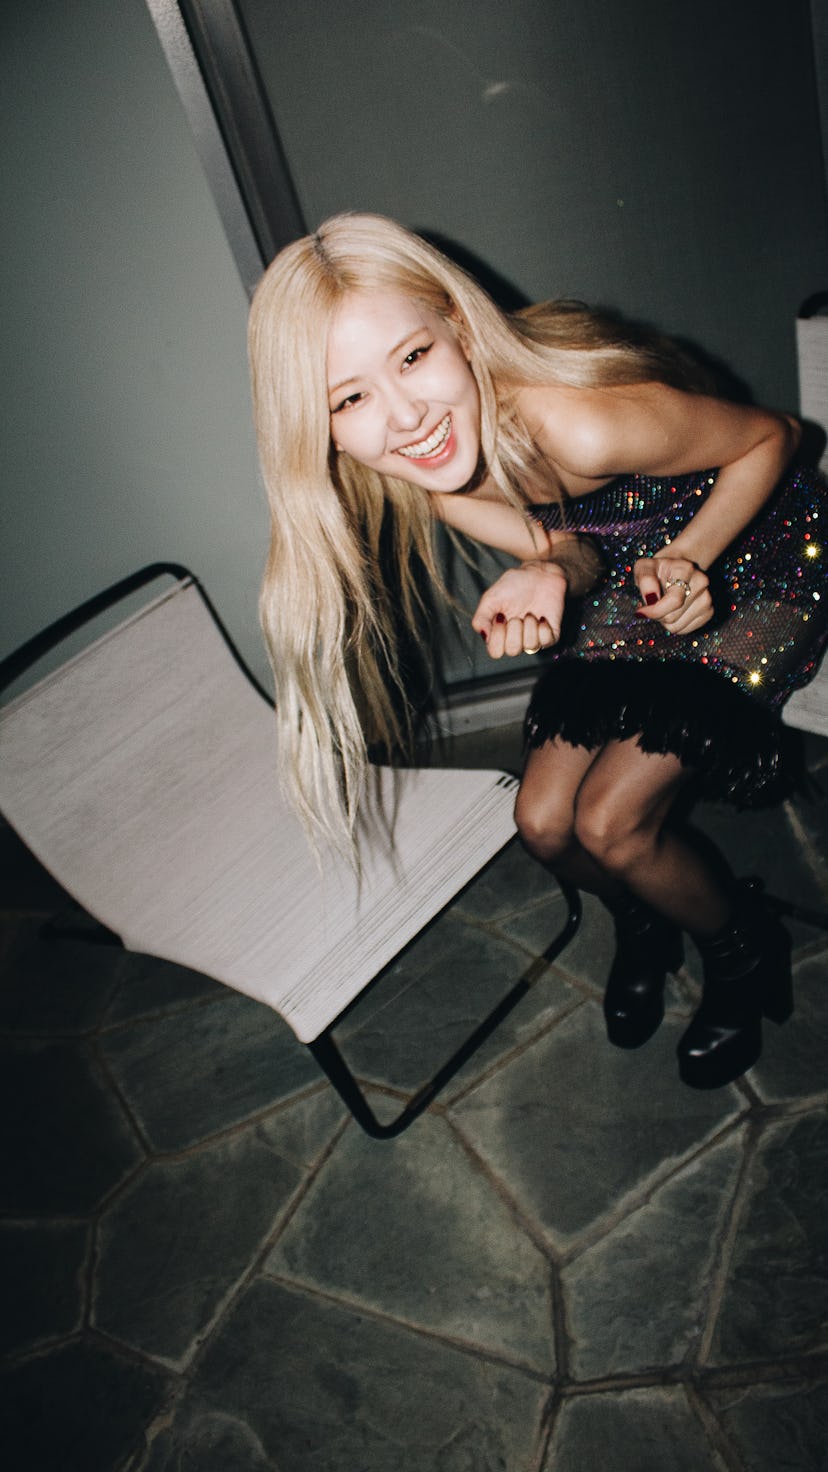 BLACKPINK’s Rosé celebrates Saint Laurent’s pre-Oscars event hosted by Anthony Vaccarello in Los Ang...